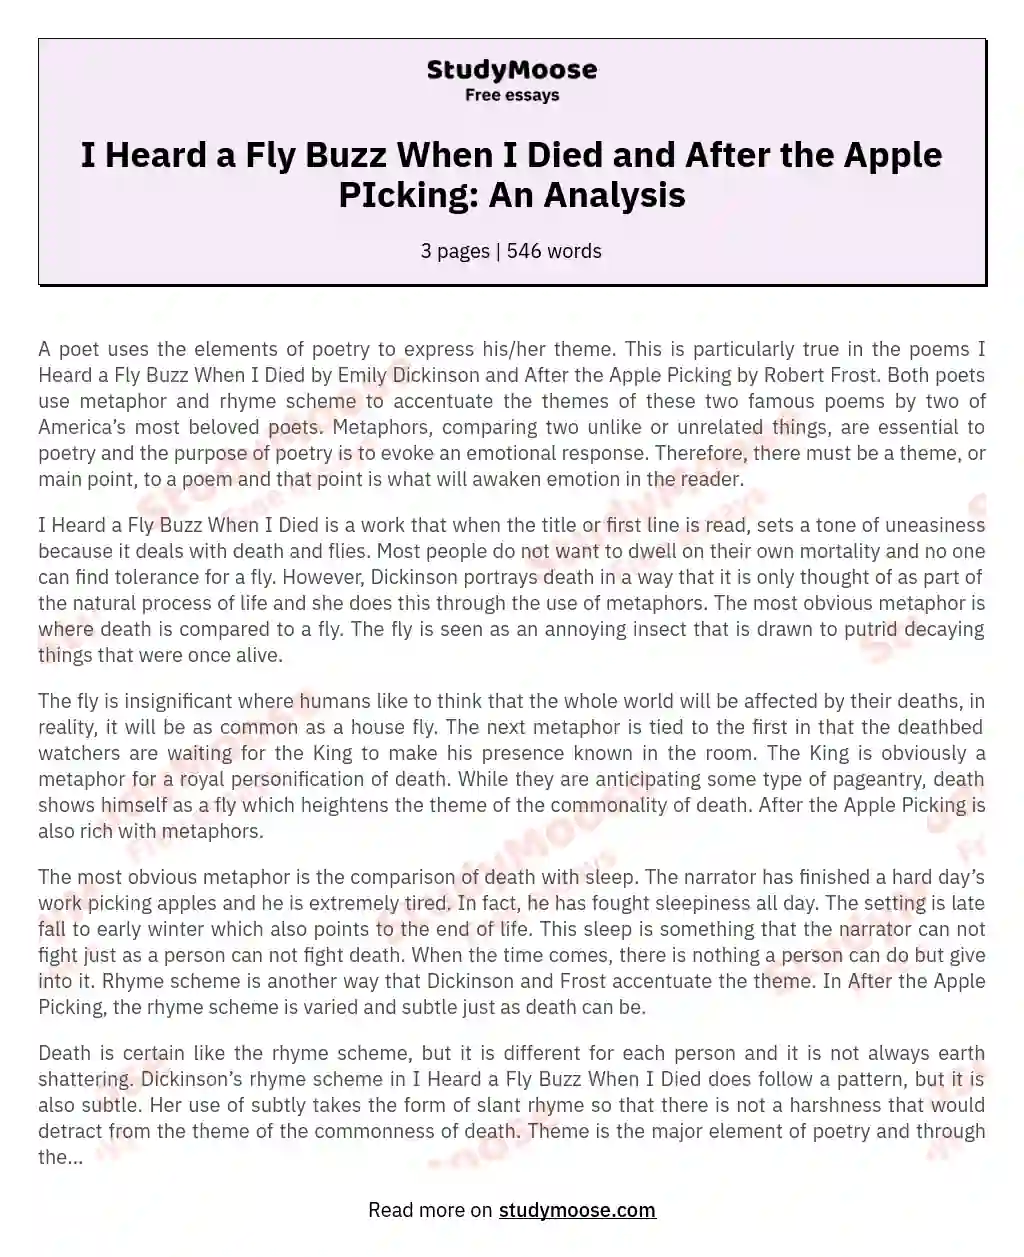 I Heard a Fly Buzz When I Died and After the Apple PIcking: An Analysis